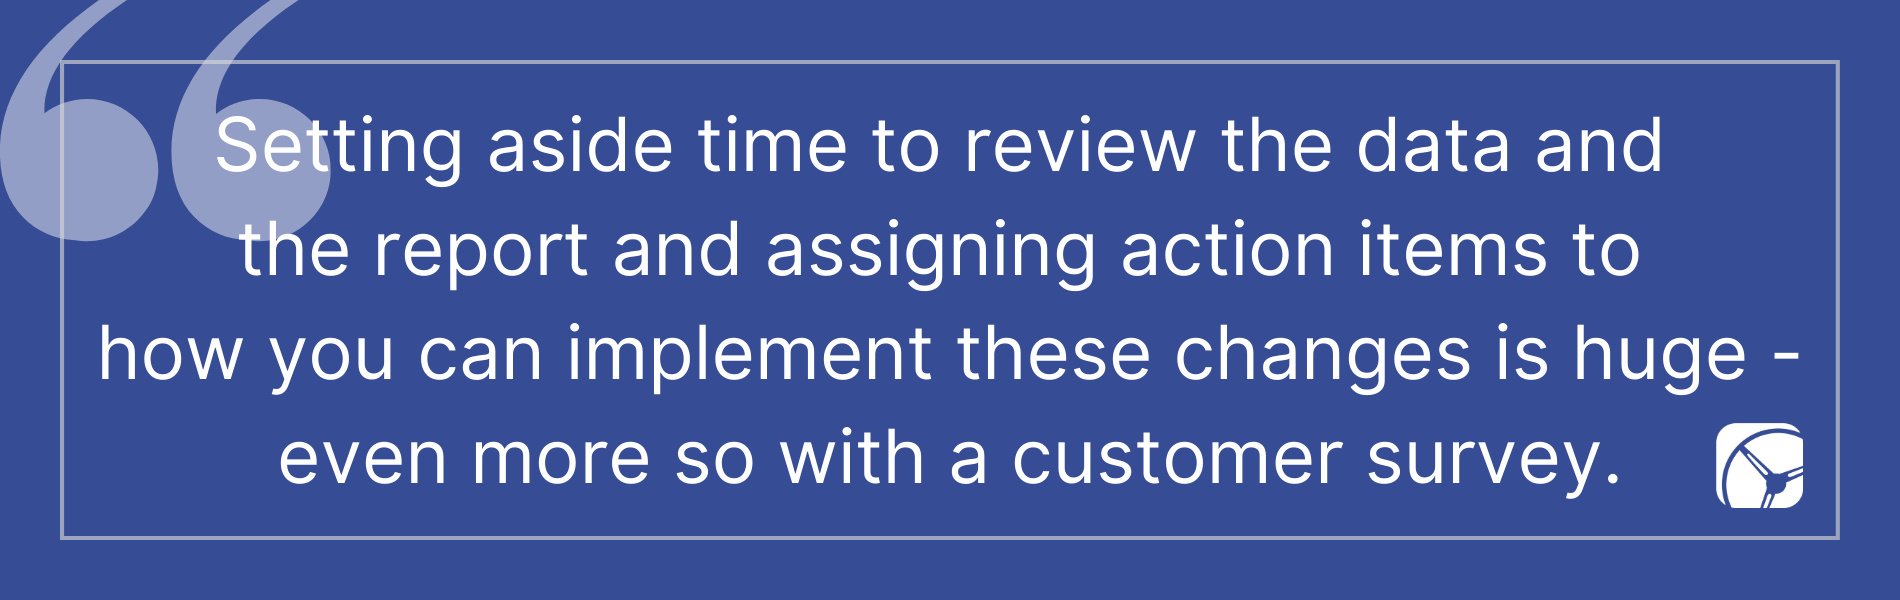 Setting aside time to review the data and  the report and assigning action items to  how you can implement these changes is huge - even more so with a customer survey.